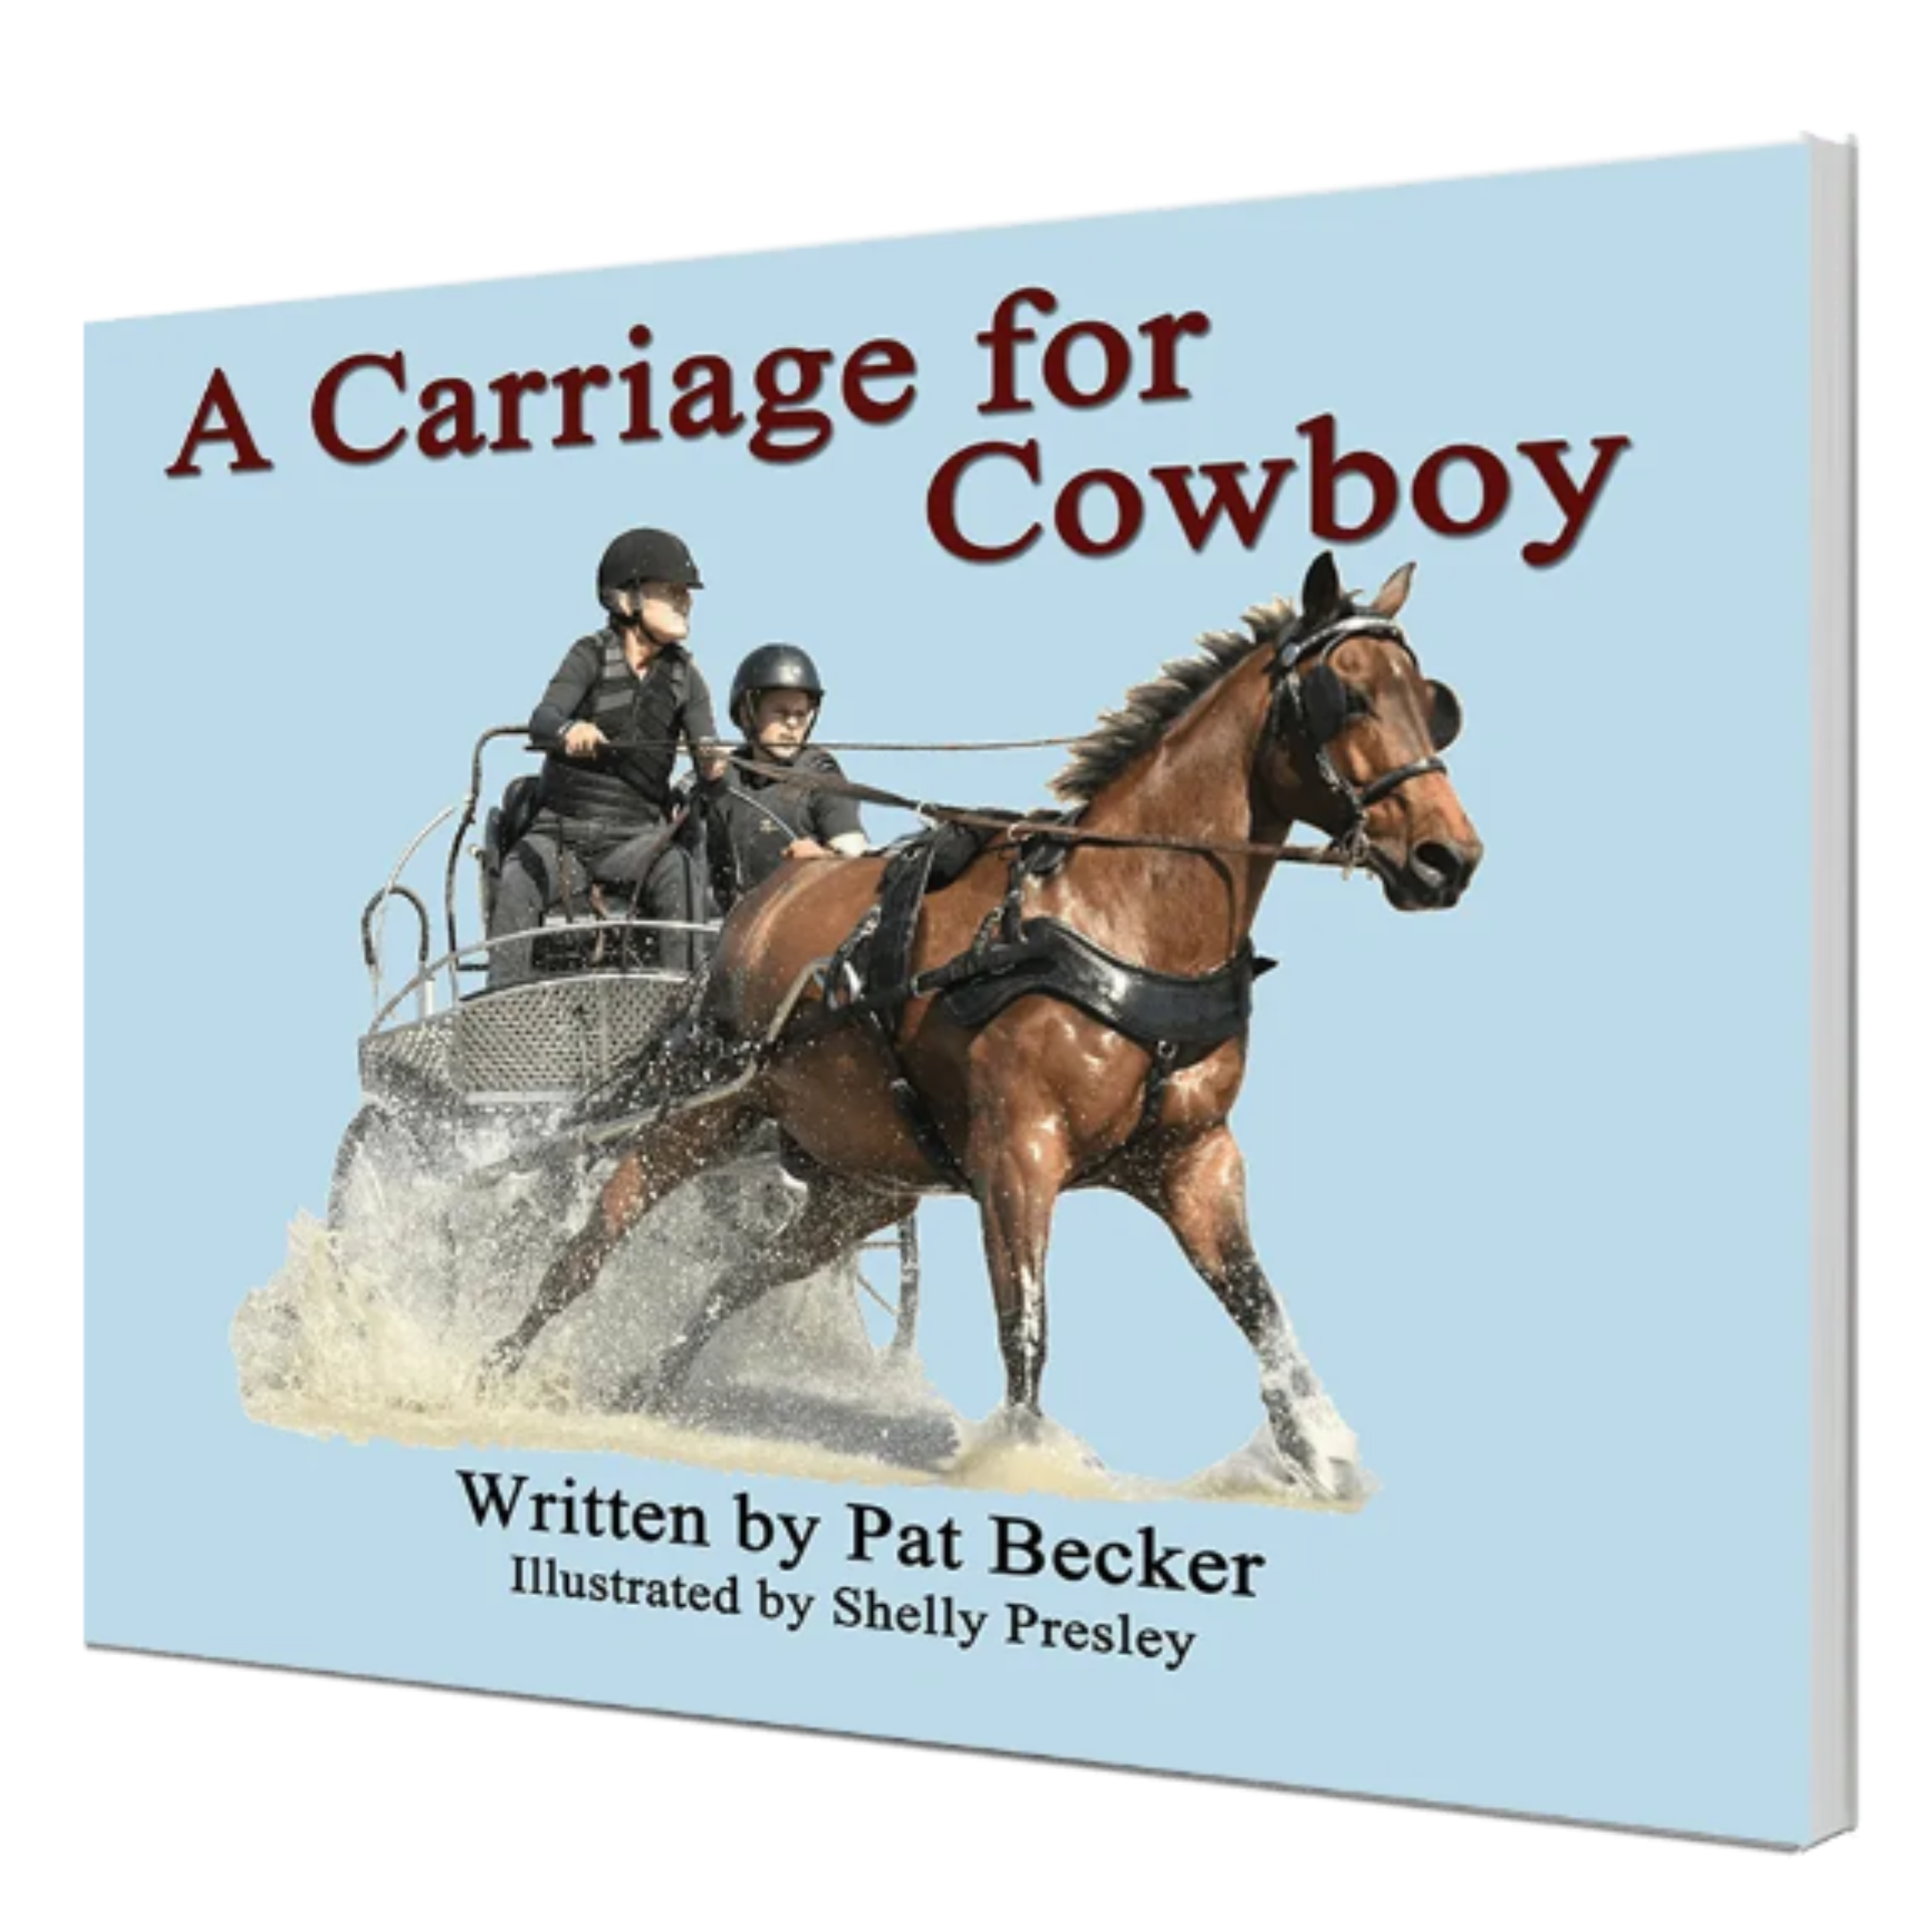 A Carriage for Cowboy